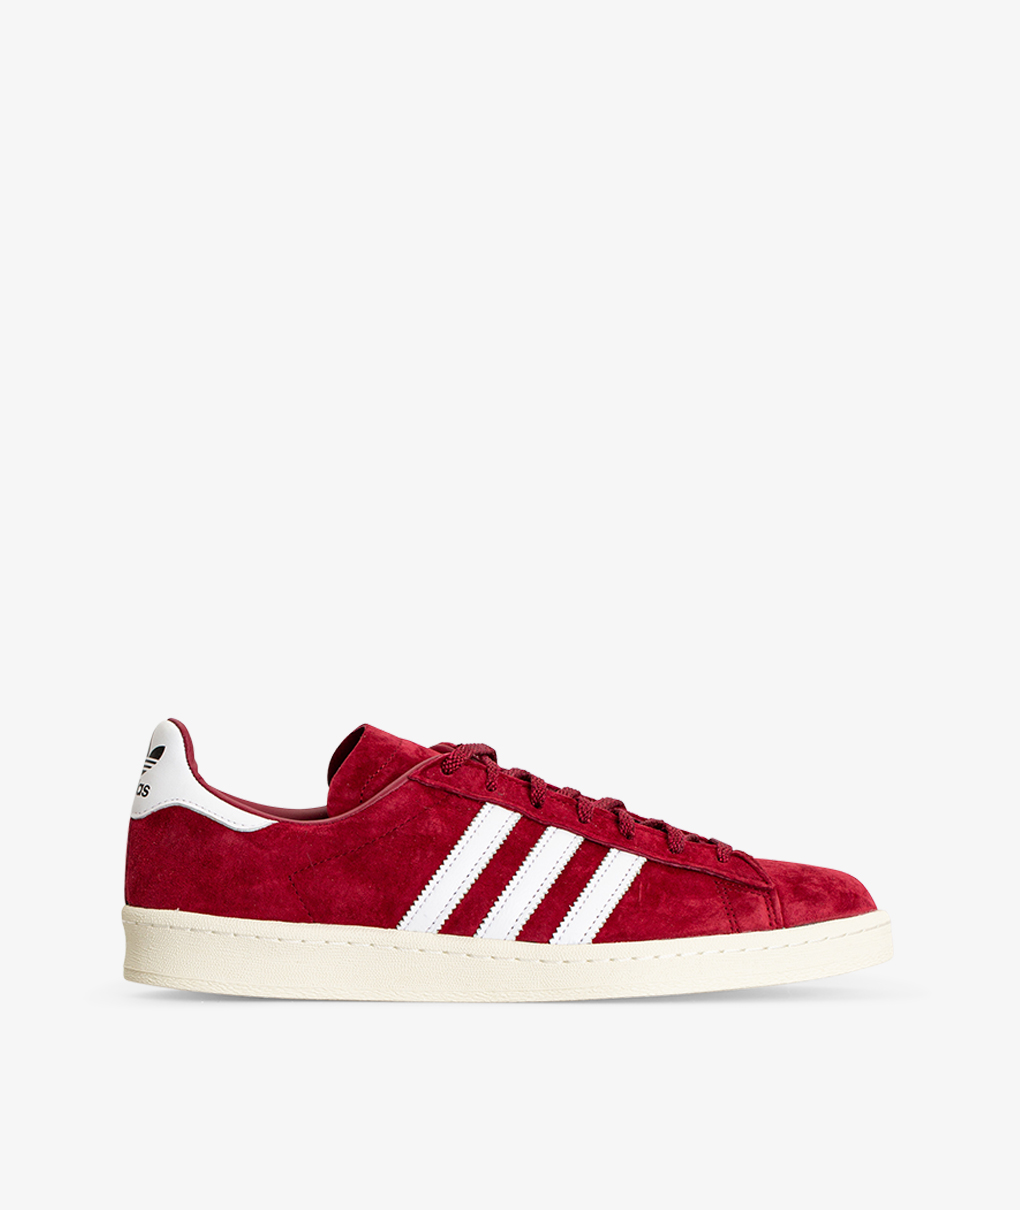 Norse Store | Shipping Worldwide - Sneakers - adidas Originals - Campus 80s